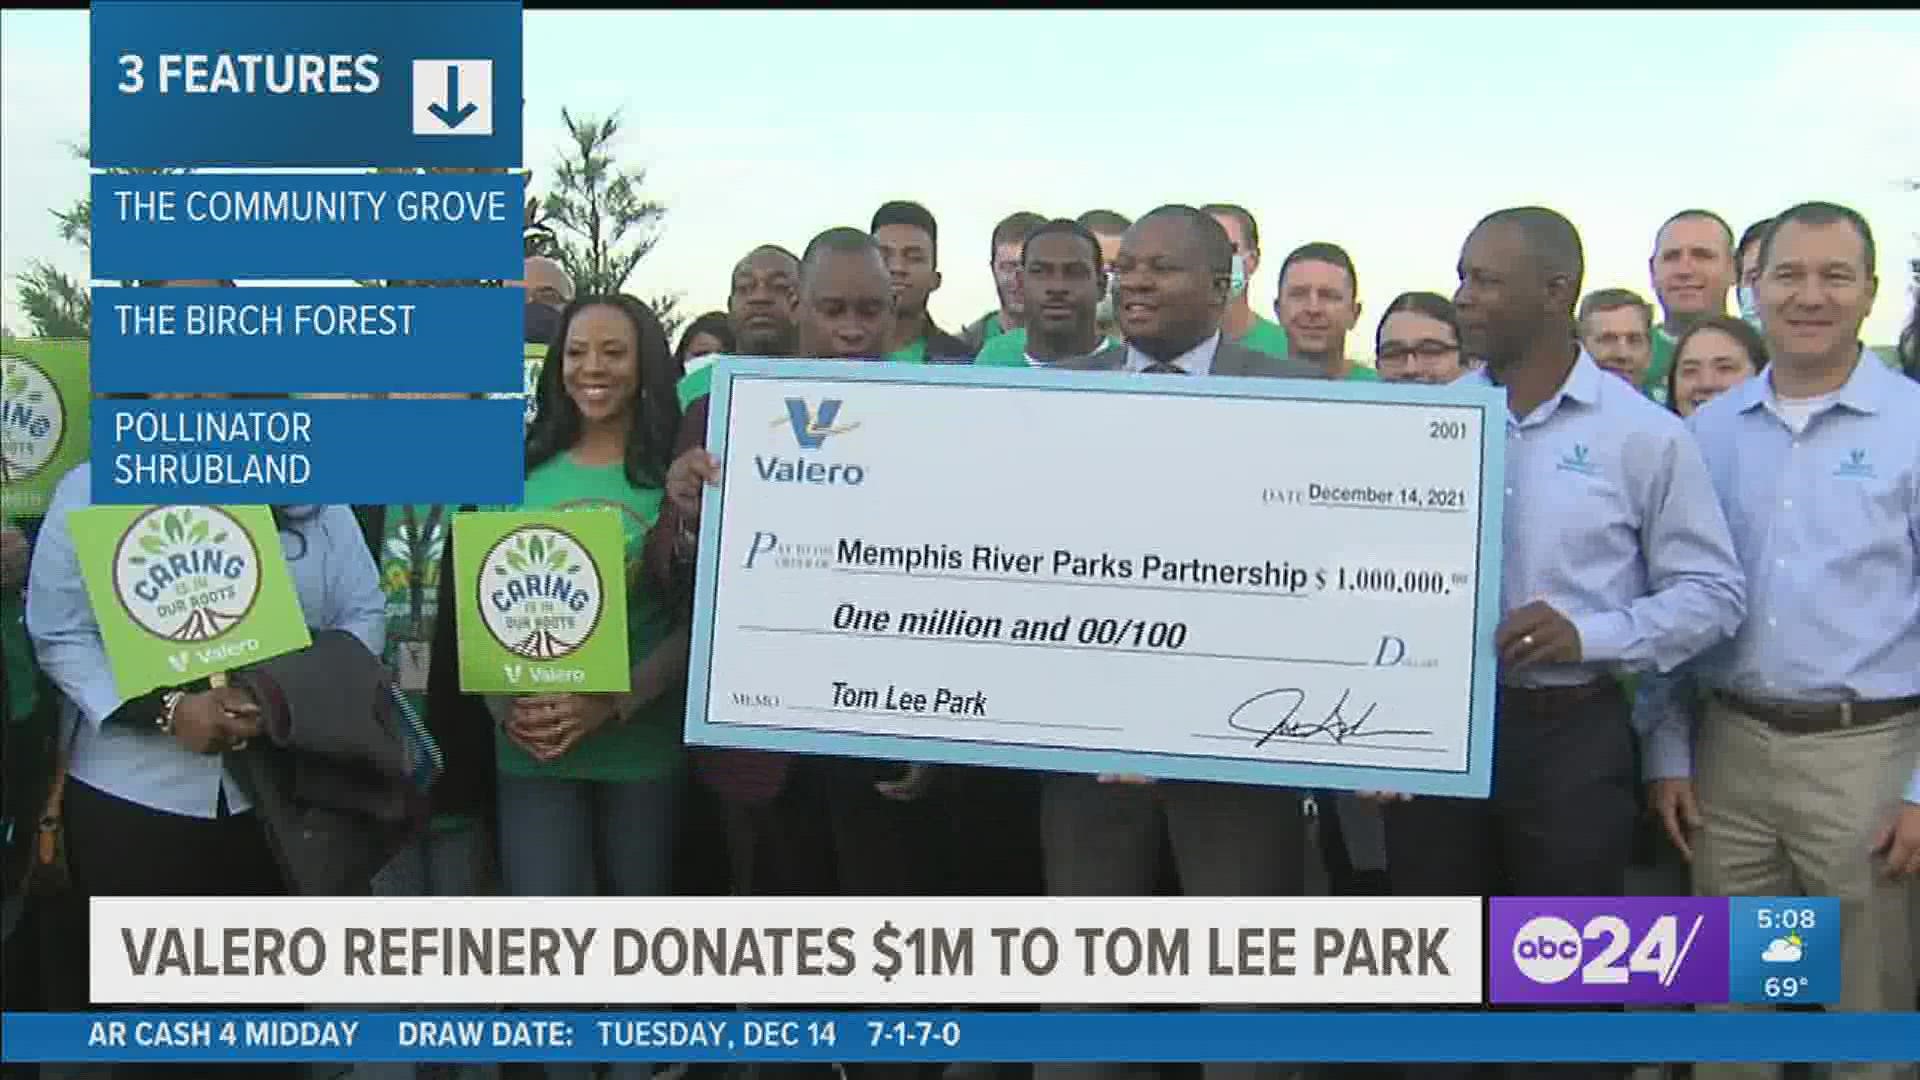 Valero is investing $1 million into the renovations of Tom Lee Park to support buying and planting 1,000 trees in the new space.